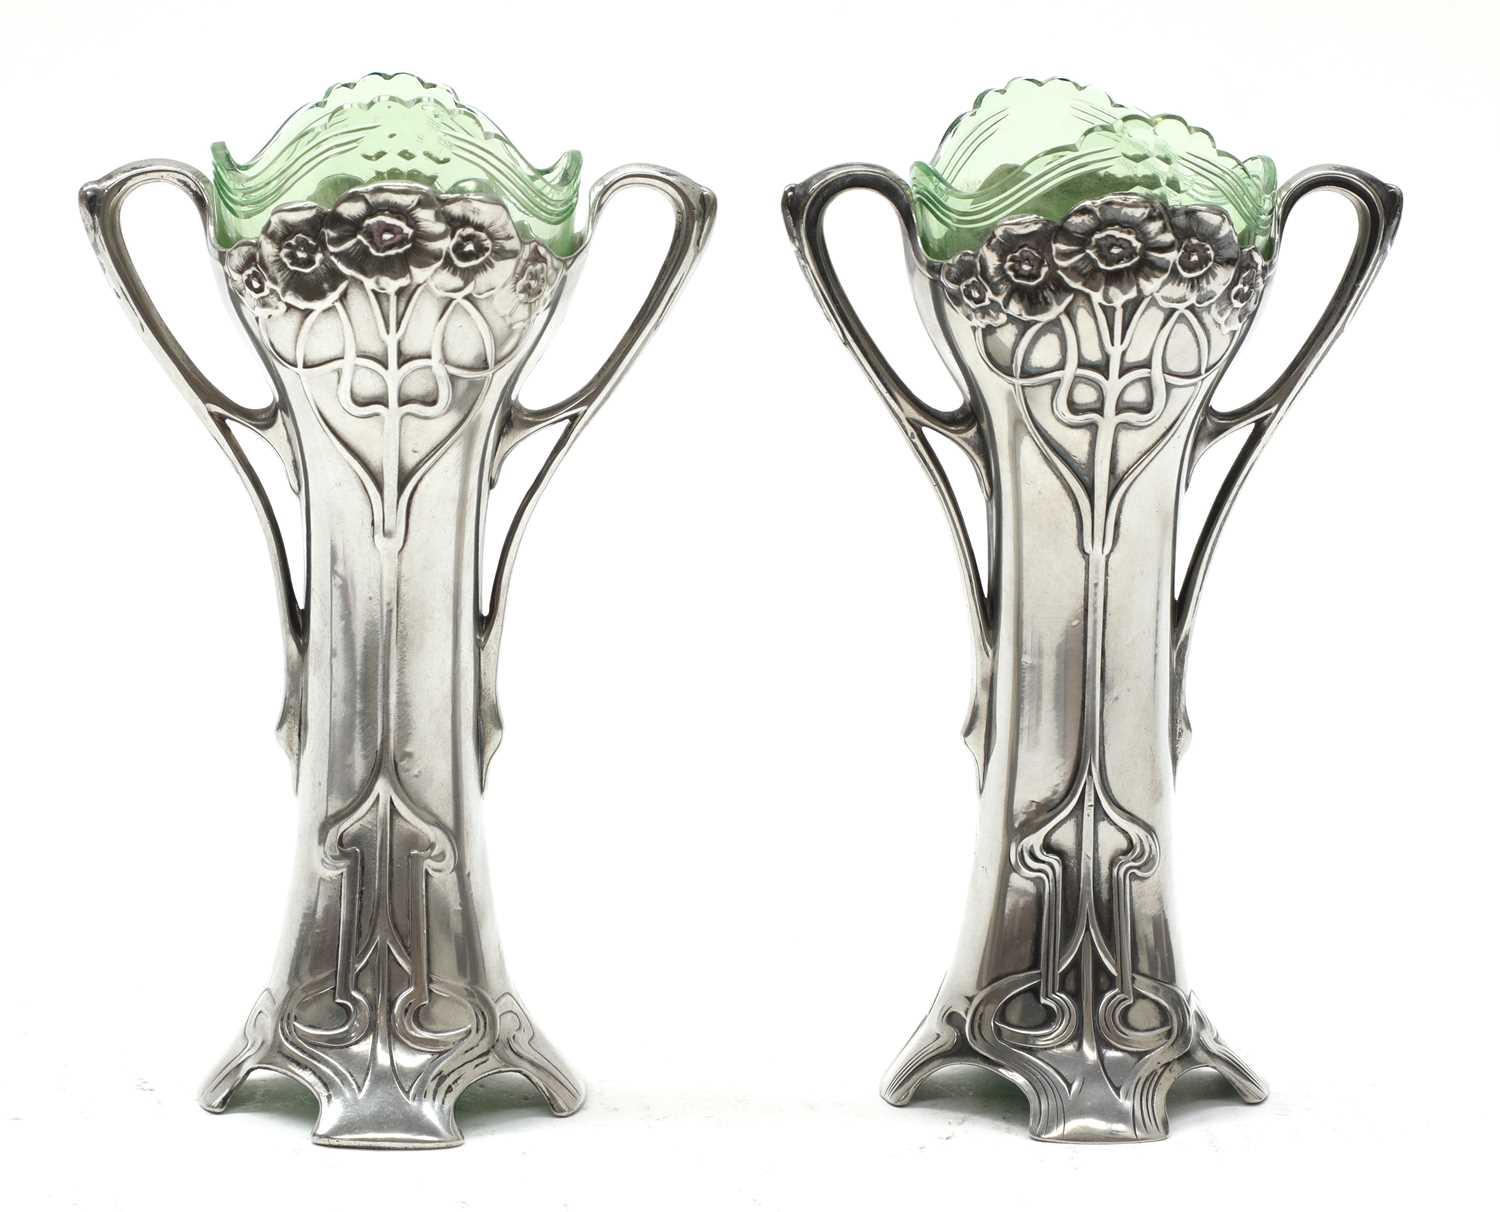 Lot 3 - A pair of WMF silver-plated vases